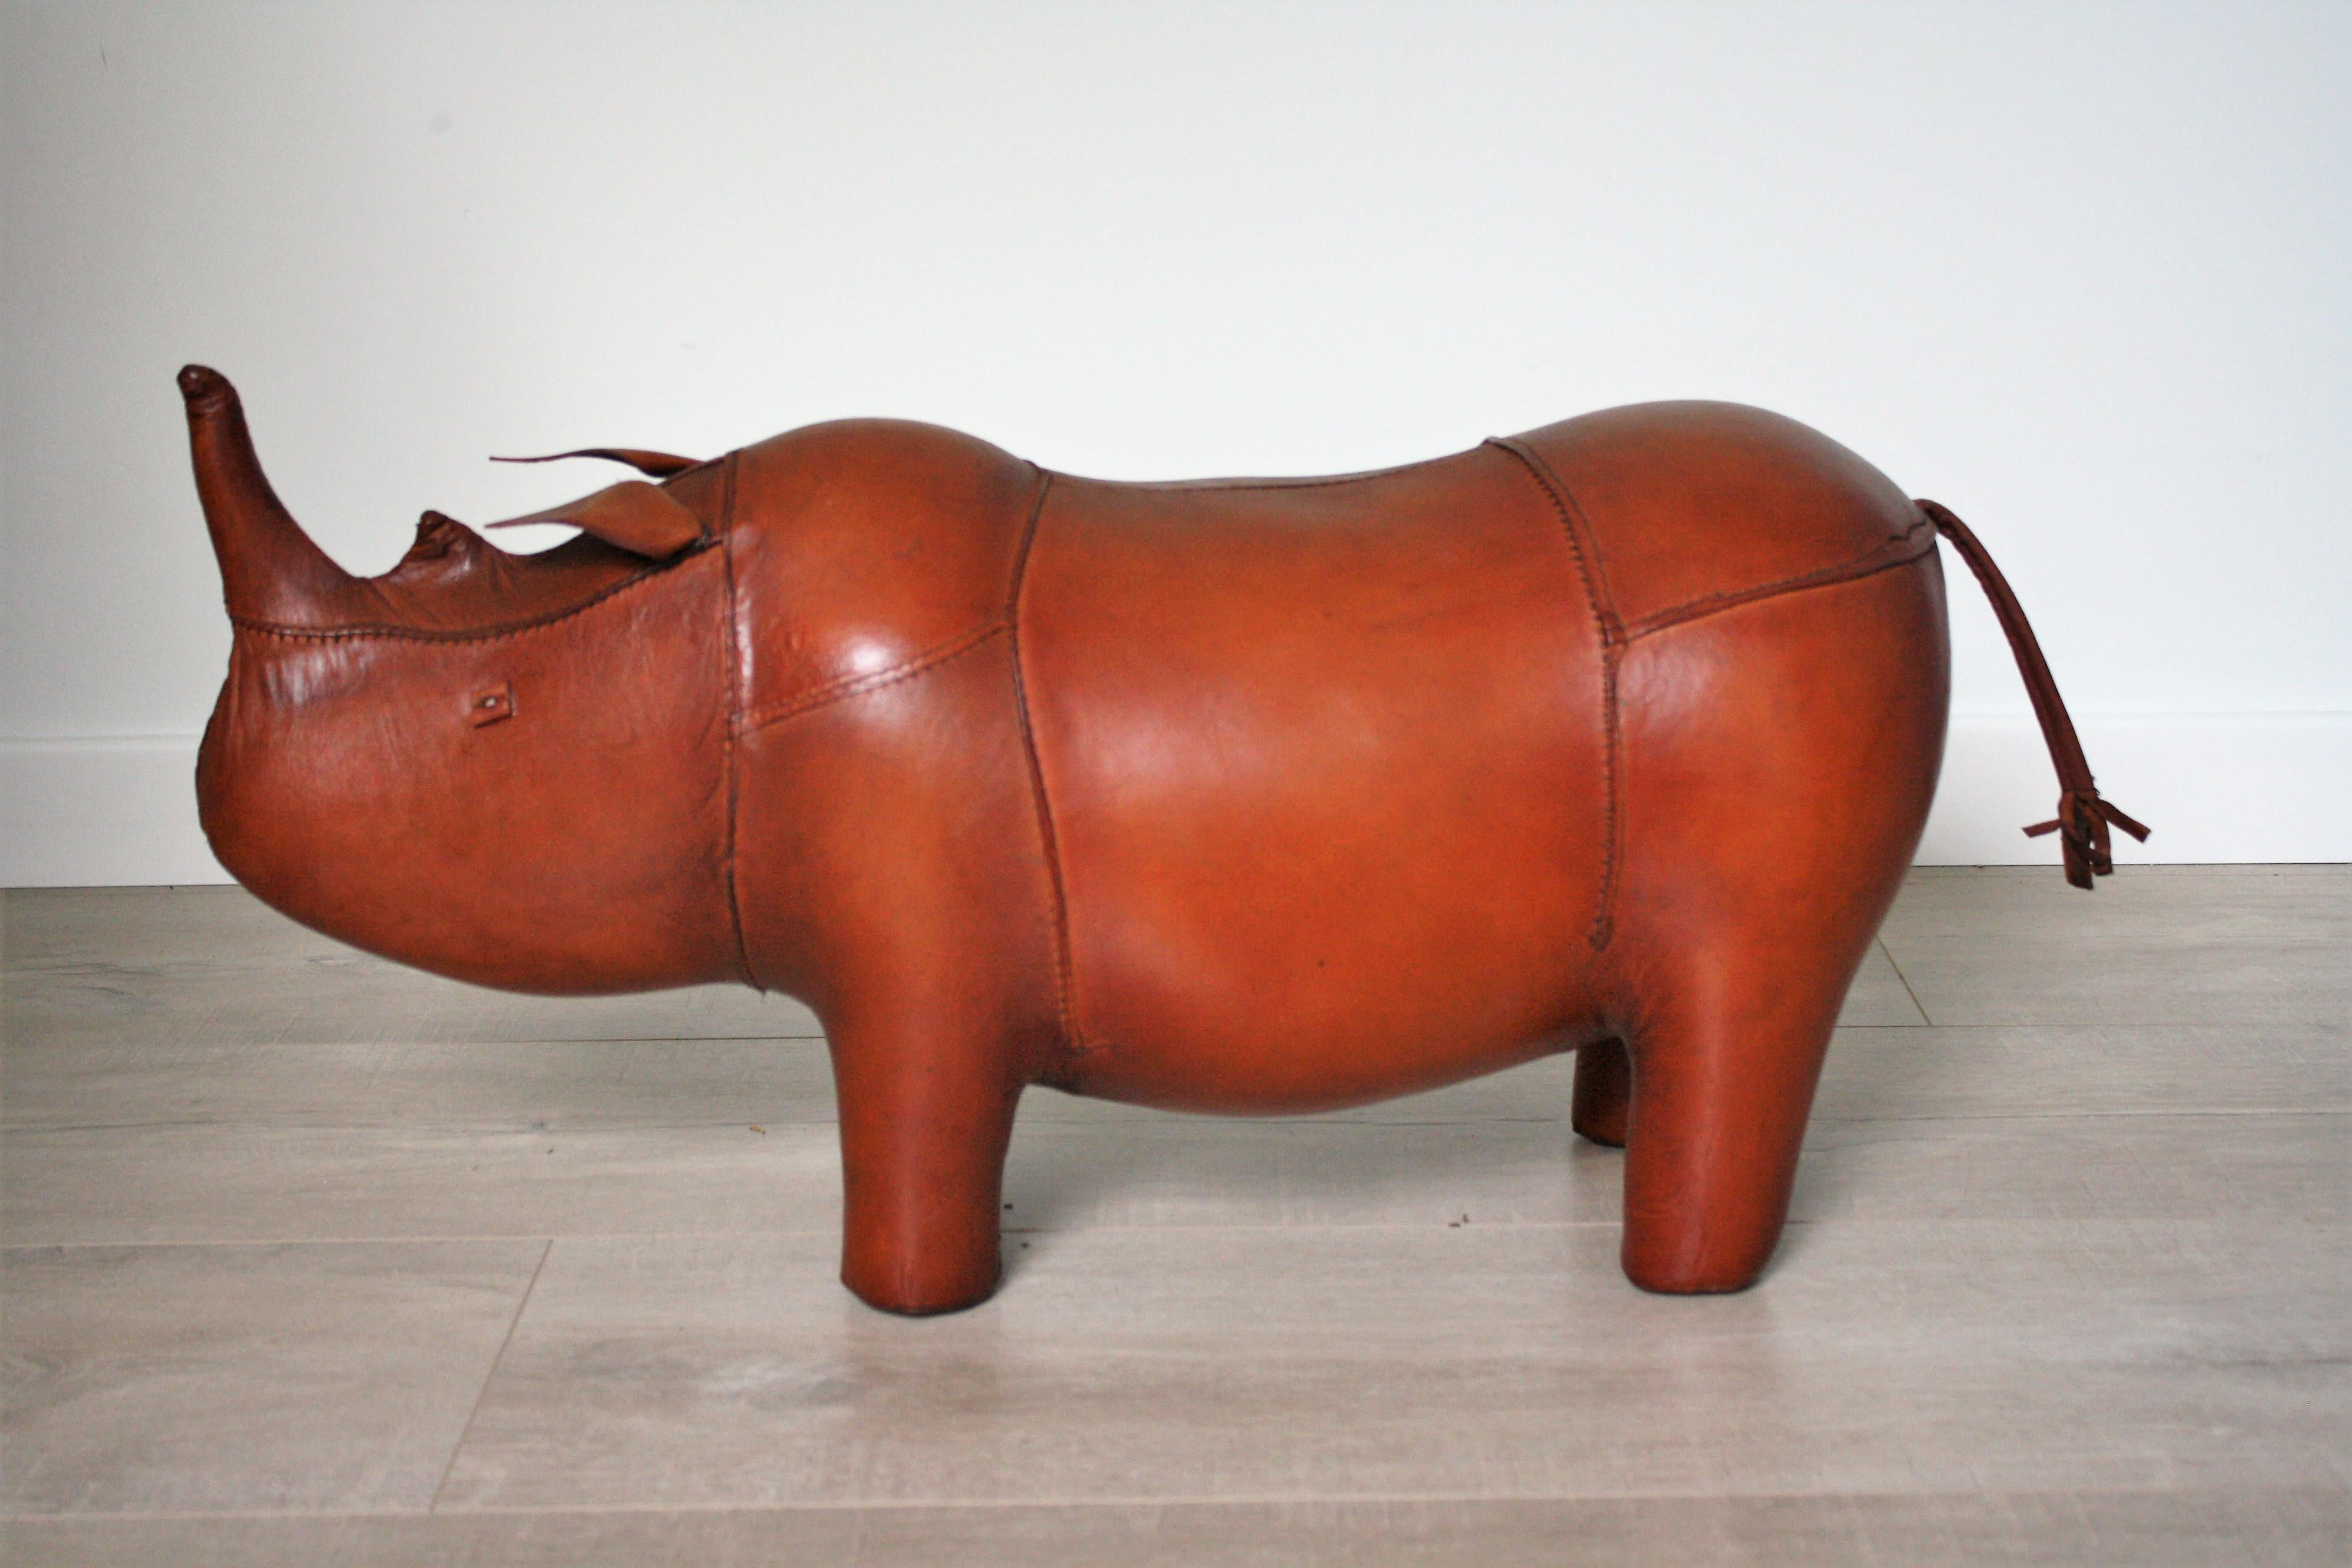 Small Vintage Rhinoceros Leather Foot Stool by Dimitri Omersa for Abercrombie 1